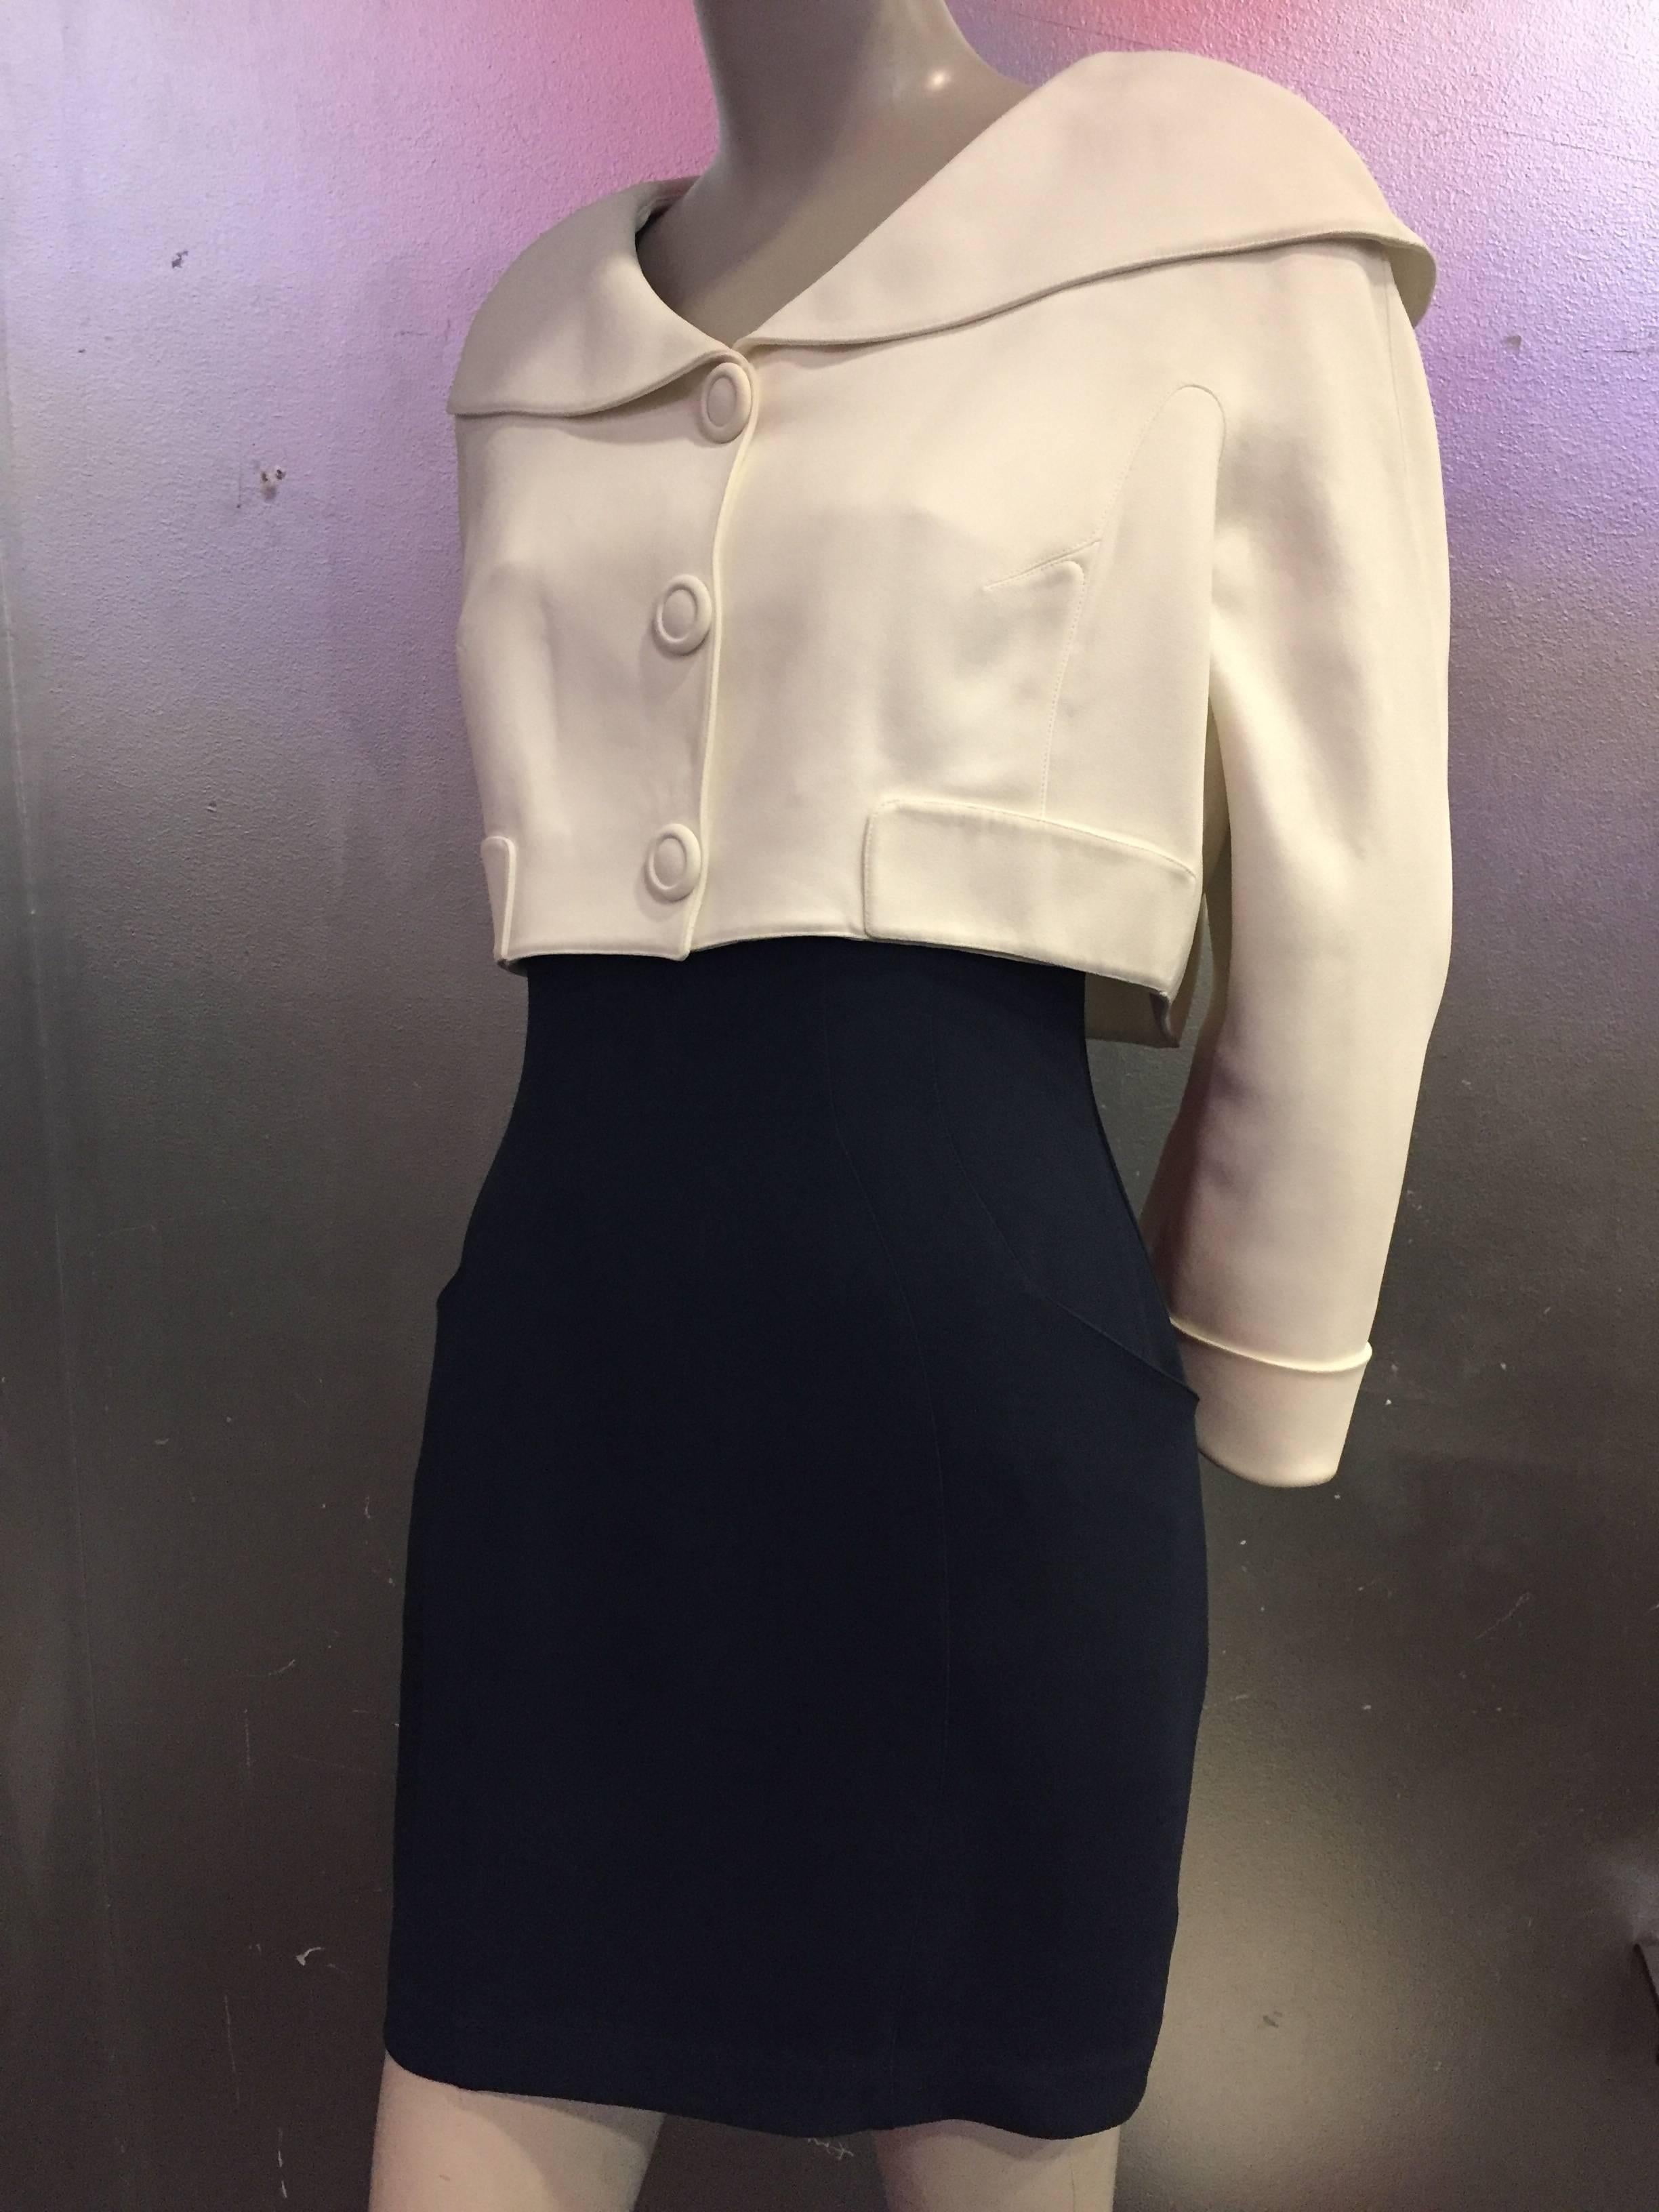 A wonderful resort "sailor-styled" 1980s Thierry Mugler 2-piece dress and jacket ensemble:  Dress is in navy crepe, cut above the knee with wide straps and a cream band around the bust.  Cream jacket is cropped with a large rounded sailor